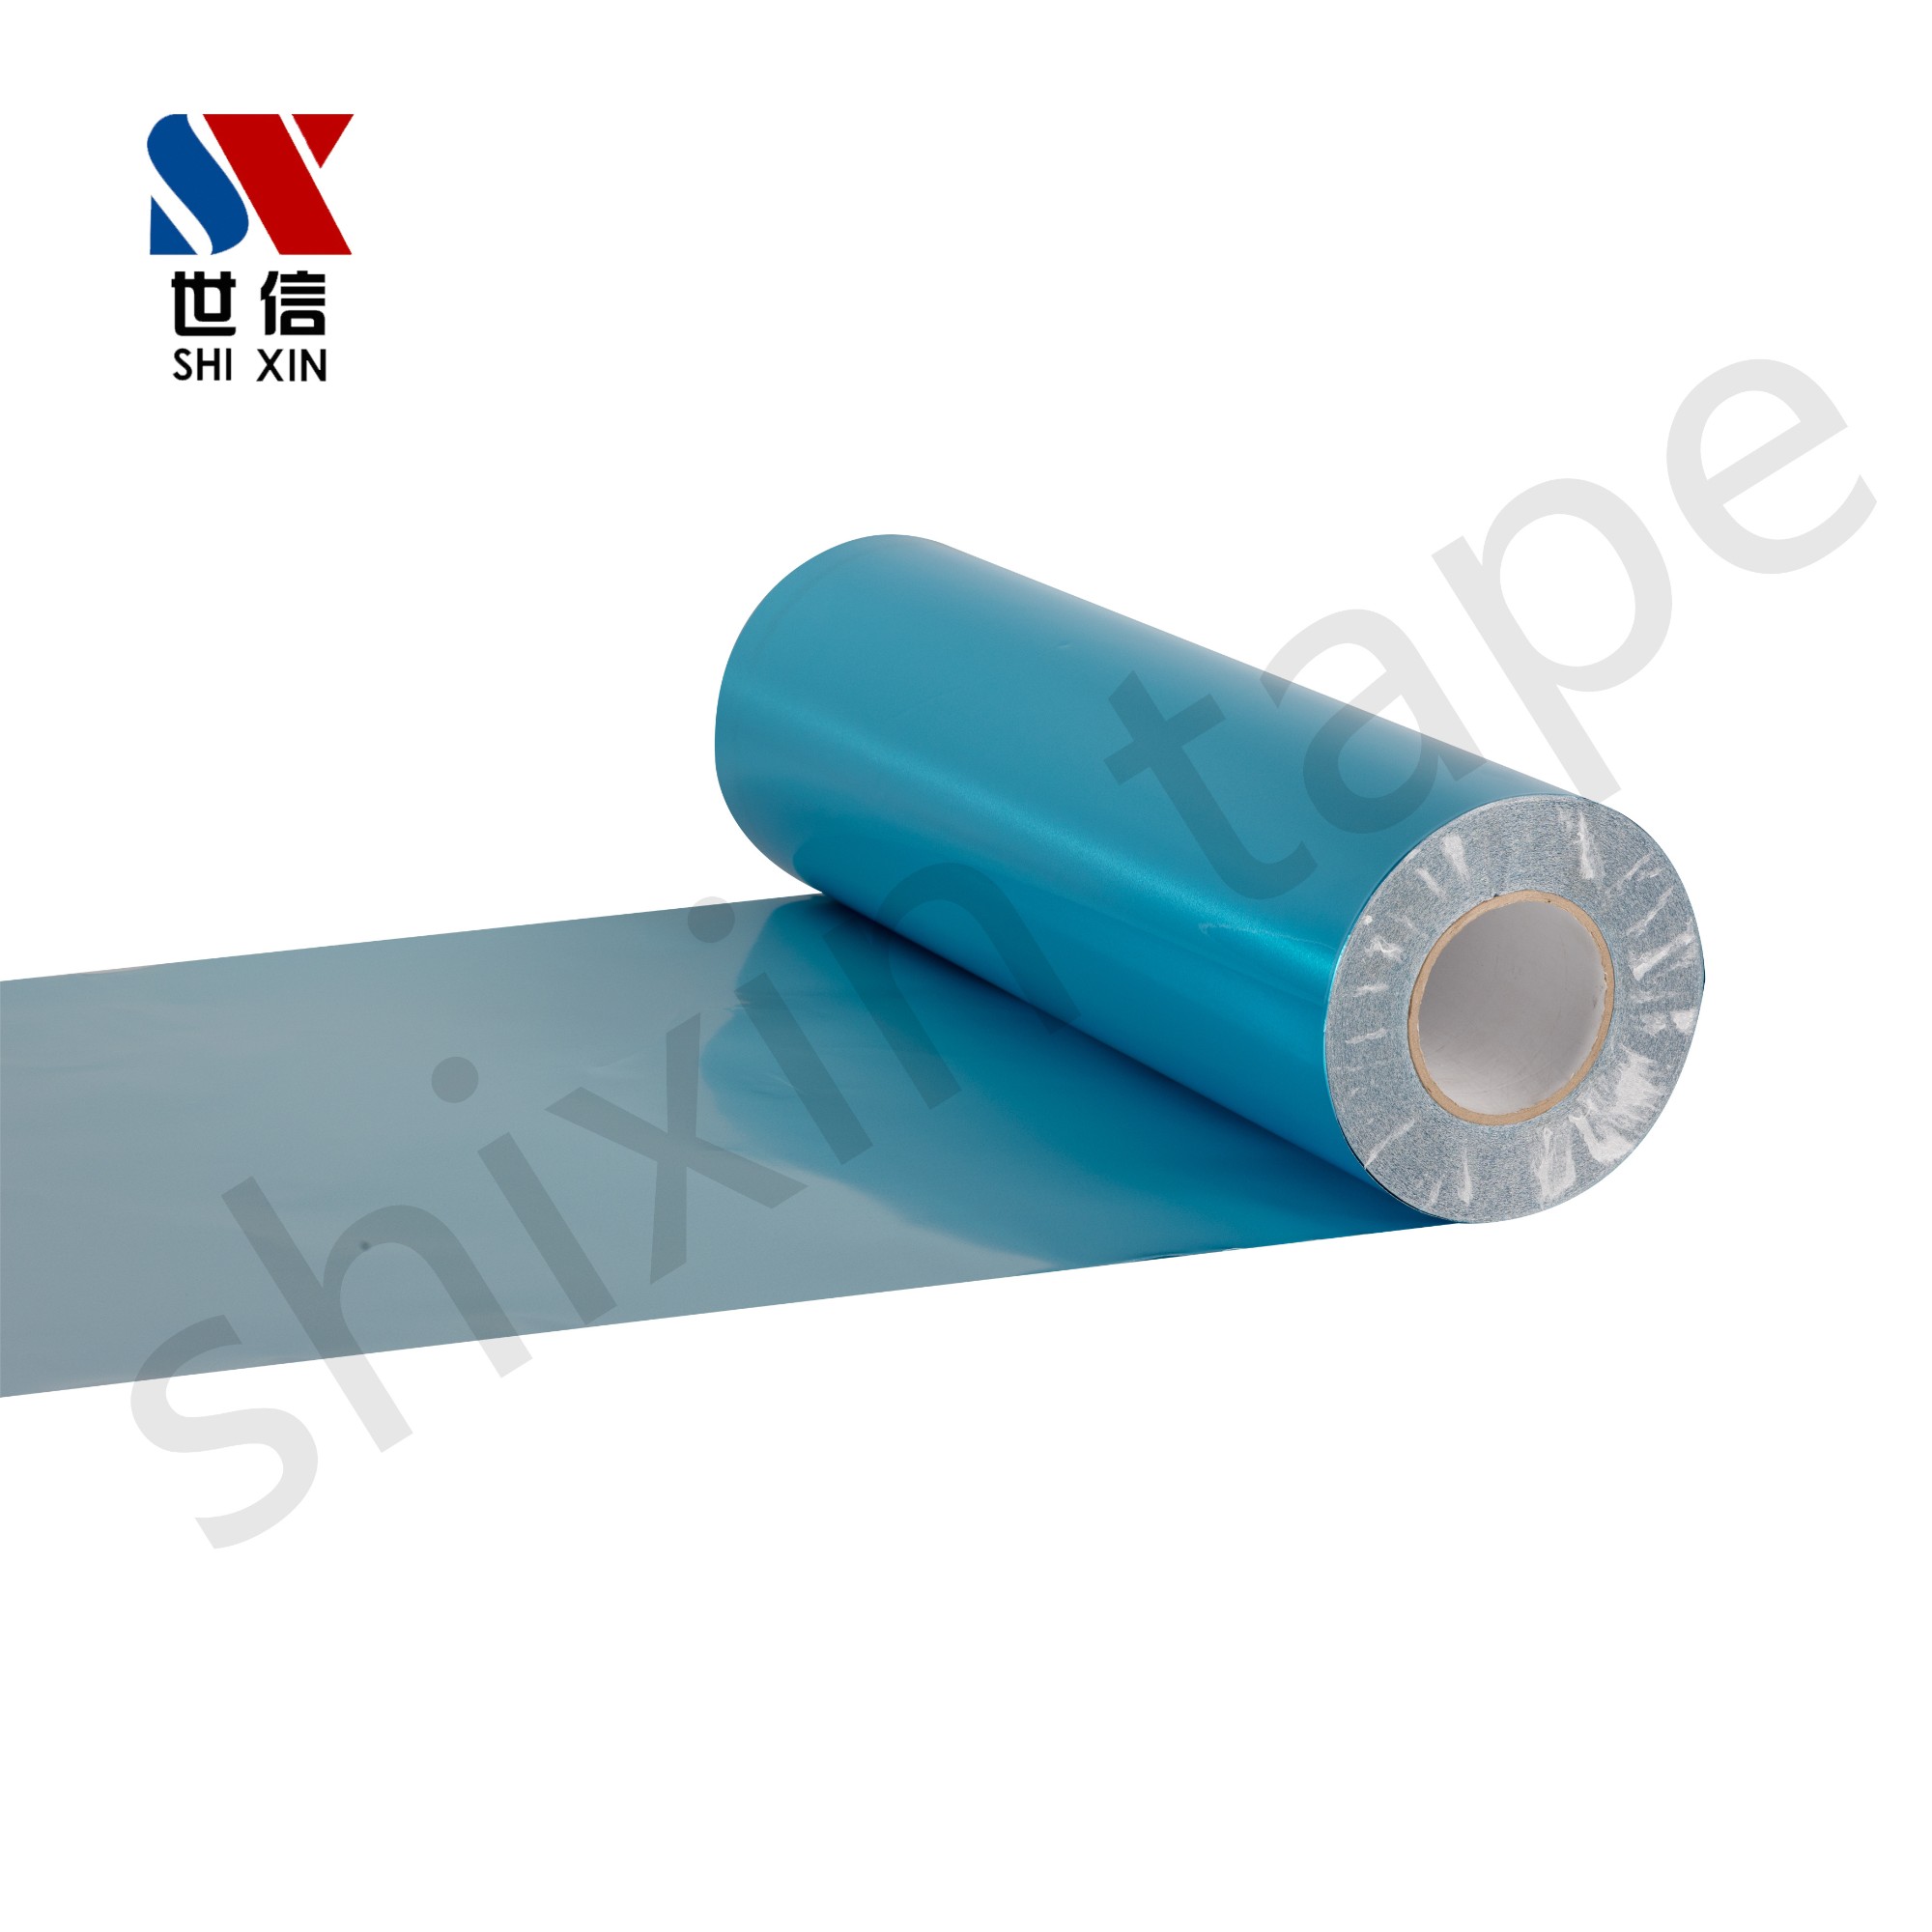 Heat seal aluminum foil tape without release film